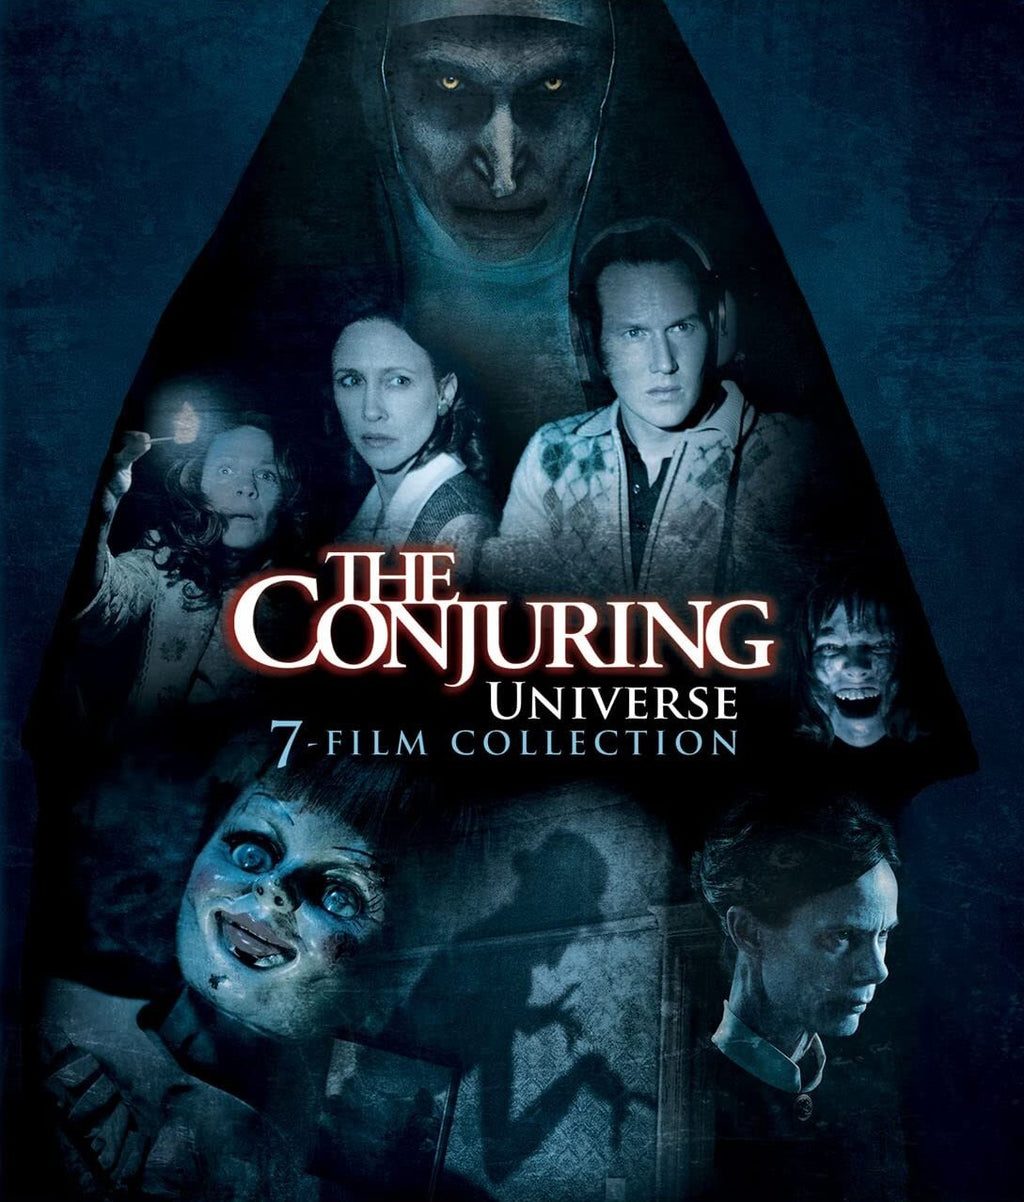 THE CONJURING UNIVERSE: 7-FILM COLLECTION BLU-RAY